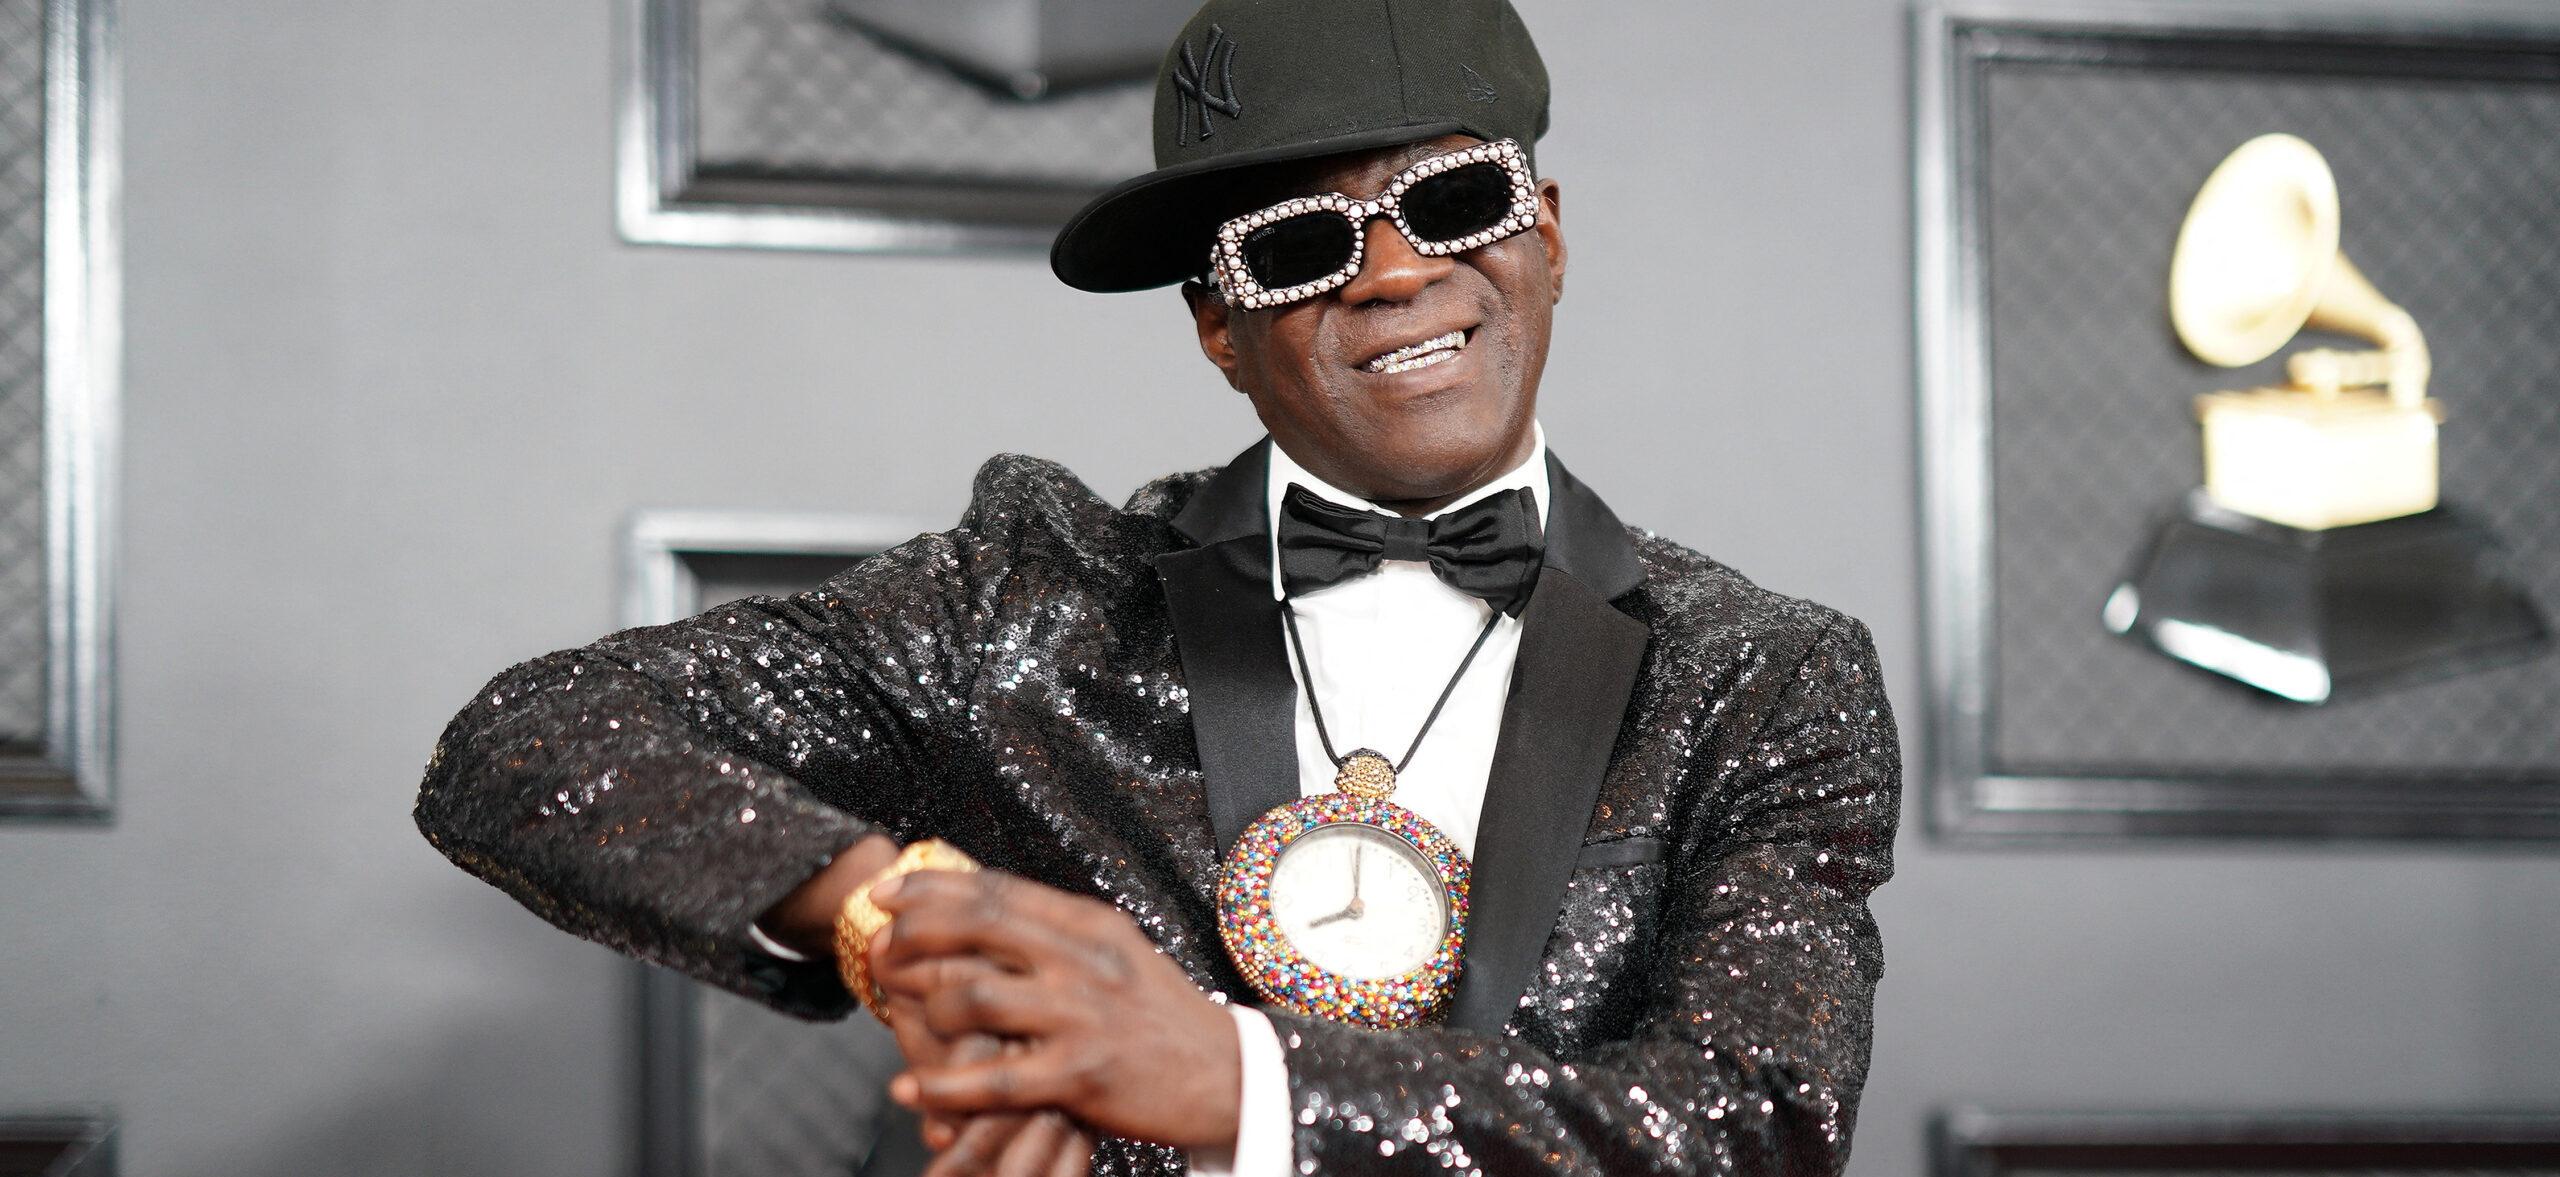 Flavor Flav Shares Update On His Sobriety Journey After Receiving His Three Years Smoke-Free Certificate